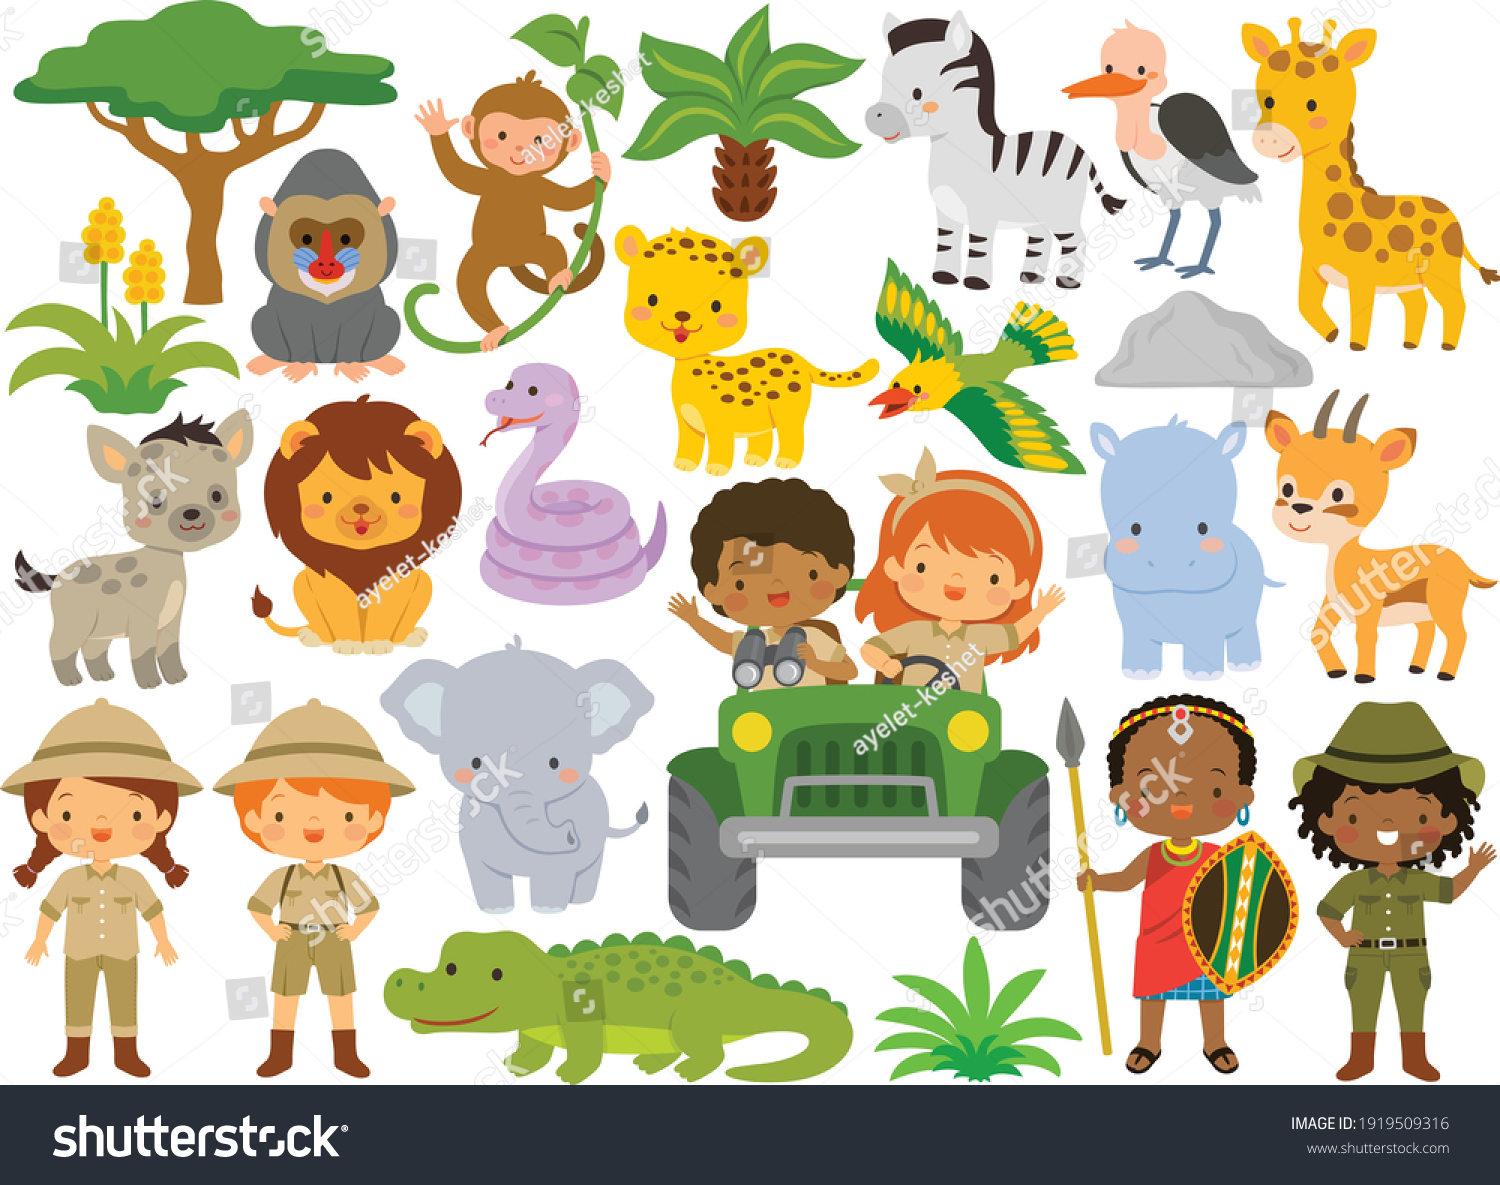 Safari animals and kids. Clipart set with wild animals and people in the African savanna.  #1919509316